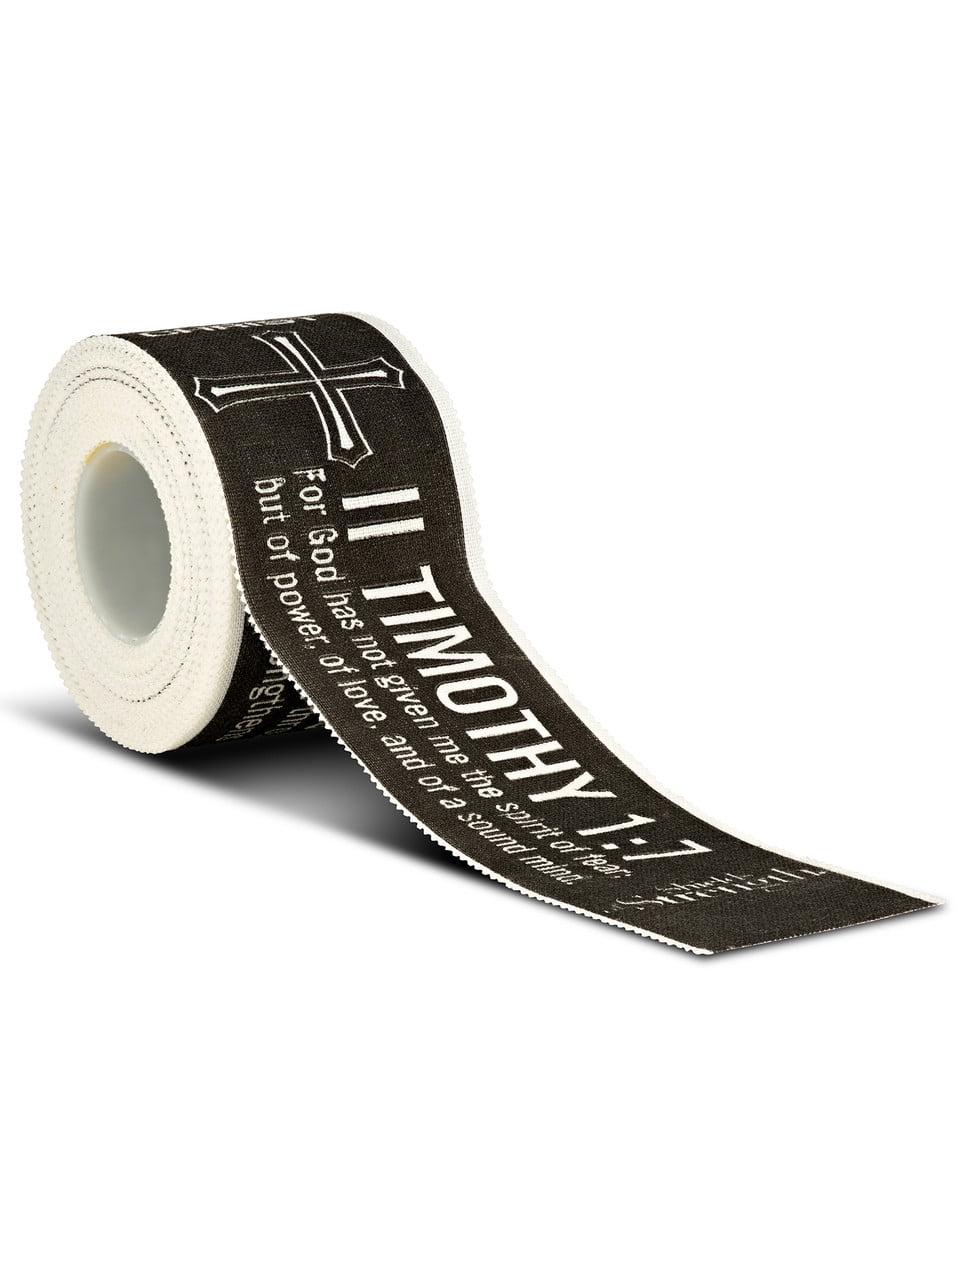 White Athletic Tape-II Timothy 1:7/Phil 4:13 in Black